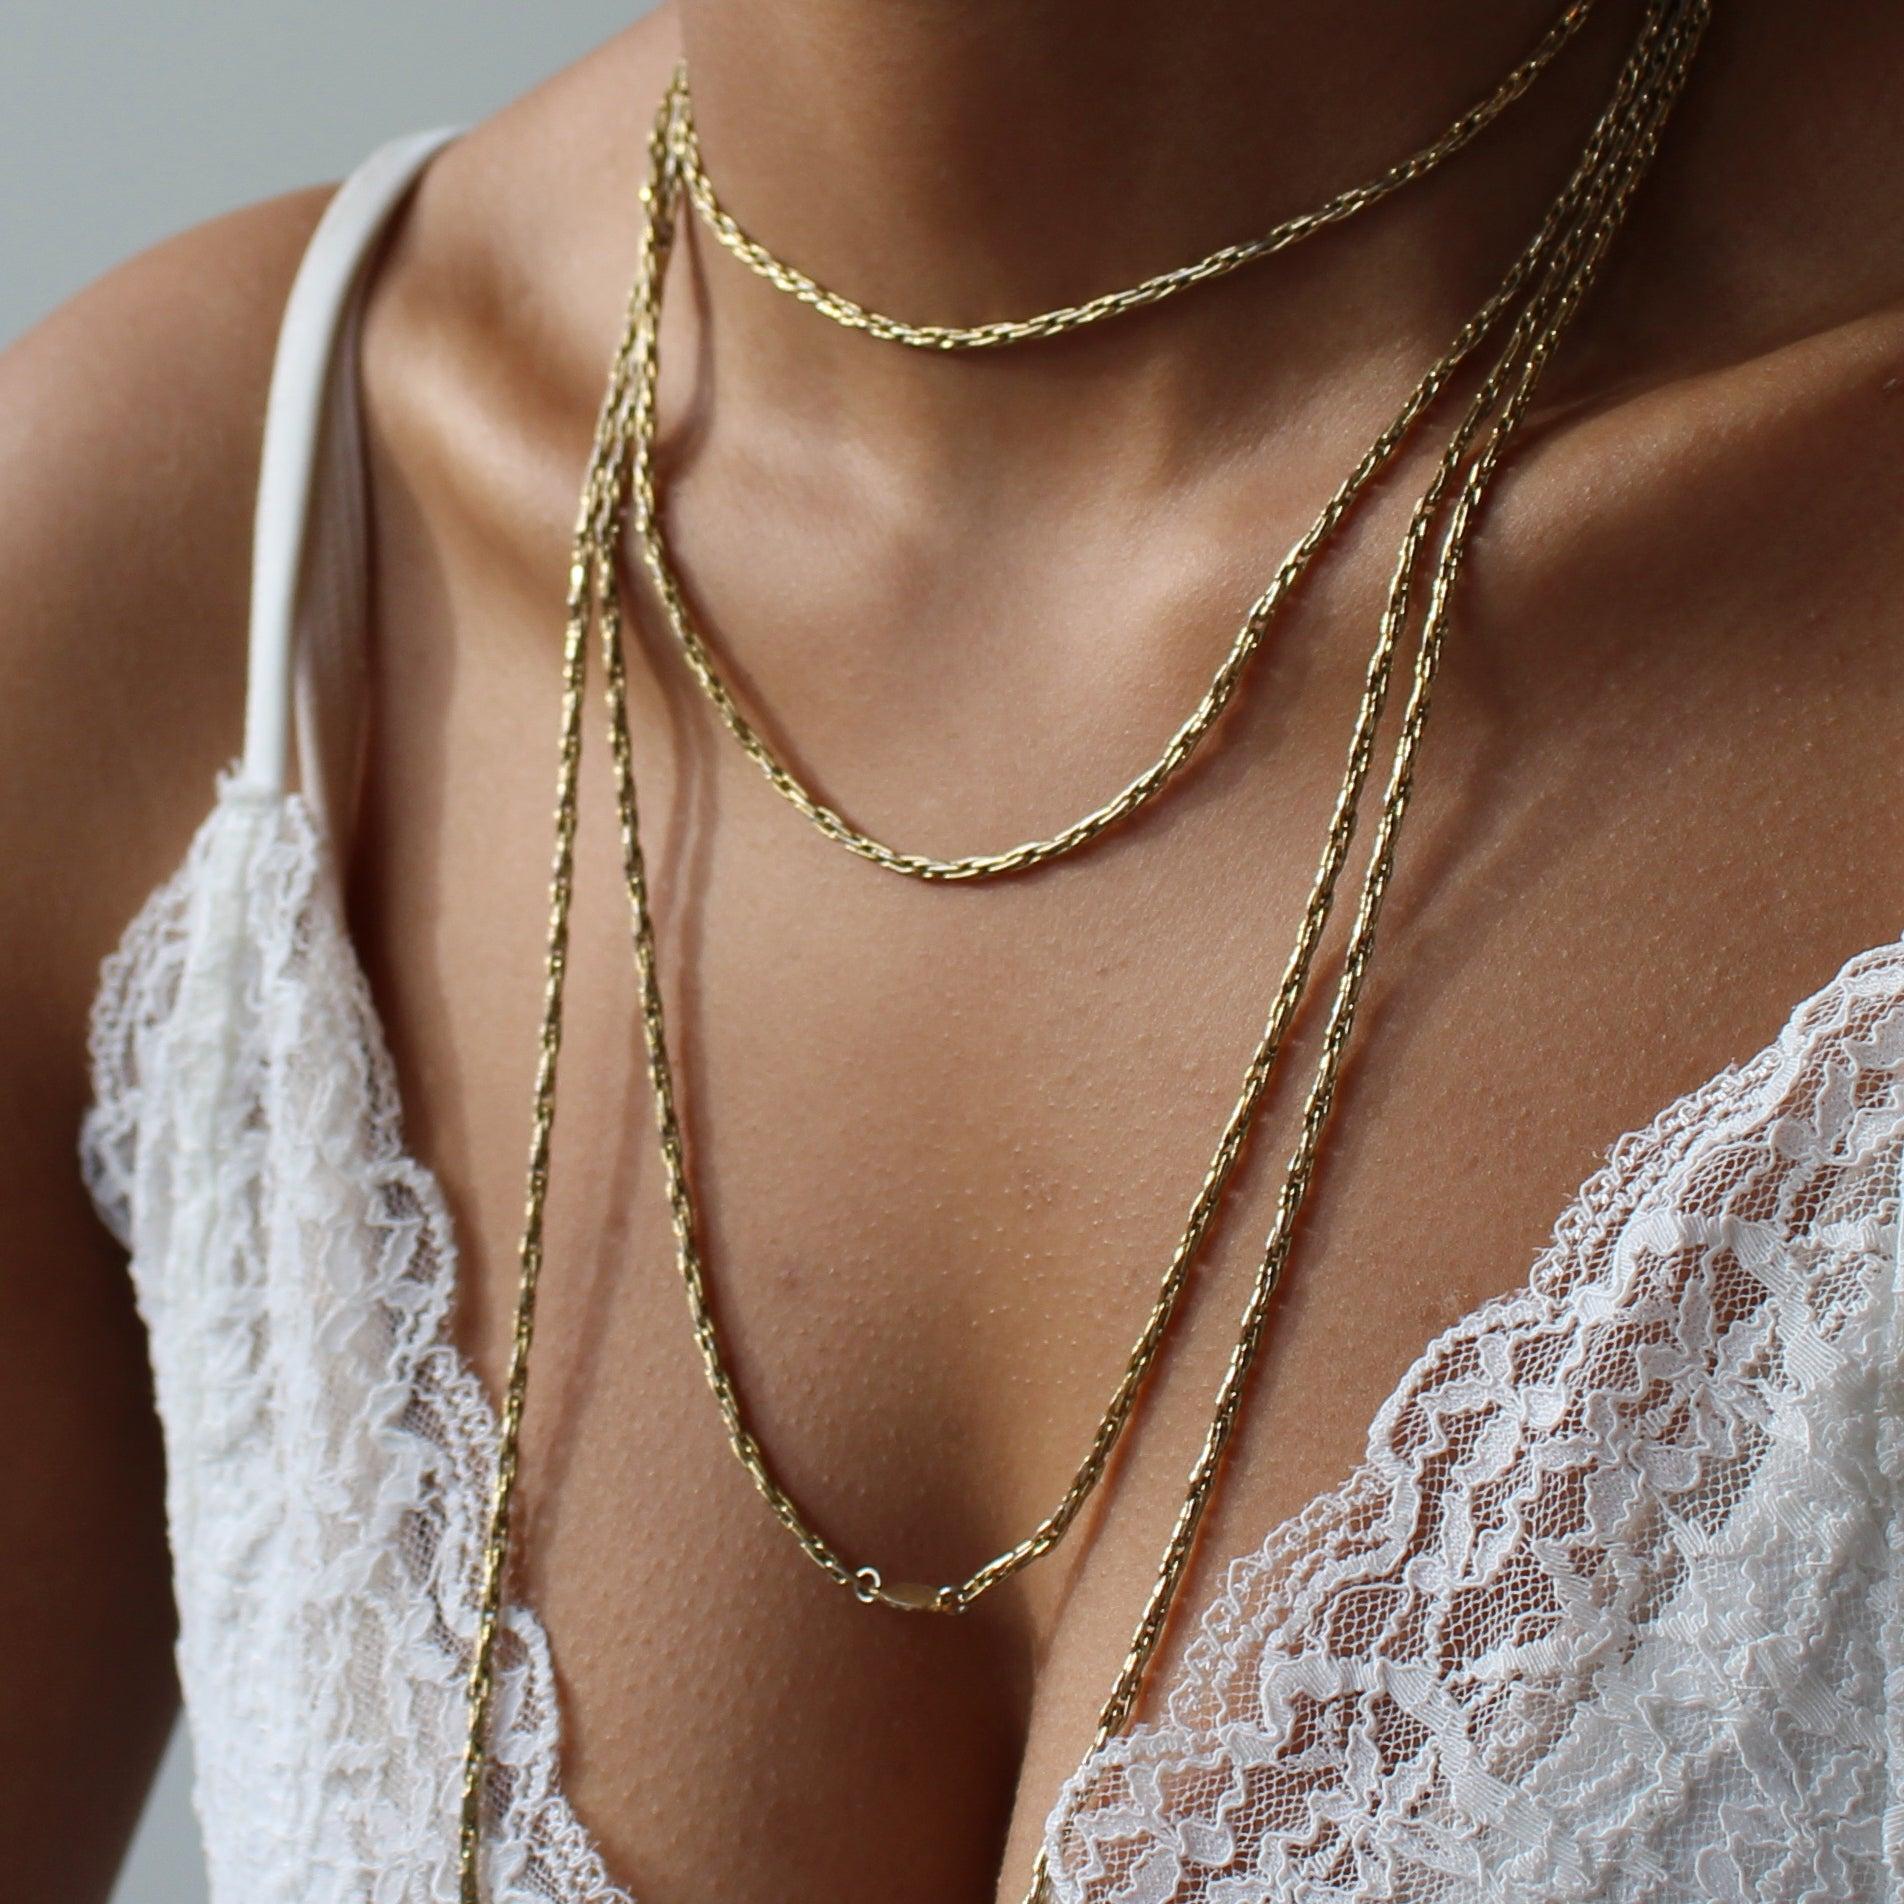 Dior Vintage 1980s Chain Necklace

Super cool and long chain from the 80s Christian Dior archive.  Made in Germany in the early 80s, this extra long rope chain is crafted from gold plated metal.

The Christian Dior aesthetic for timelessly elegant